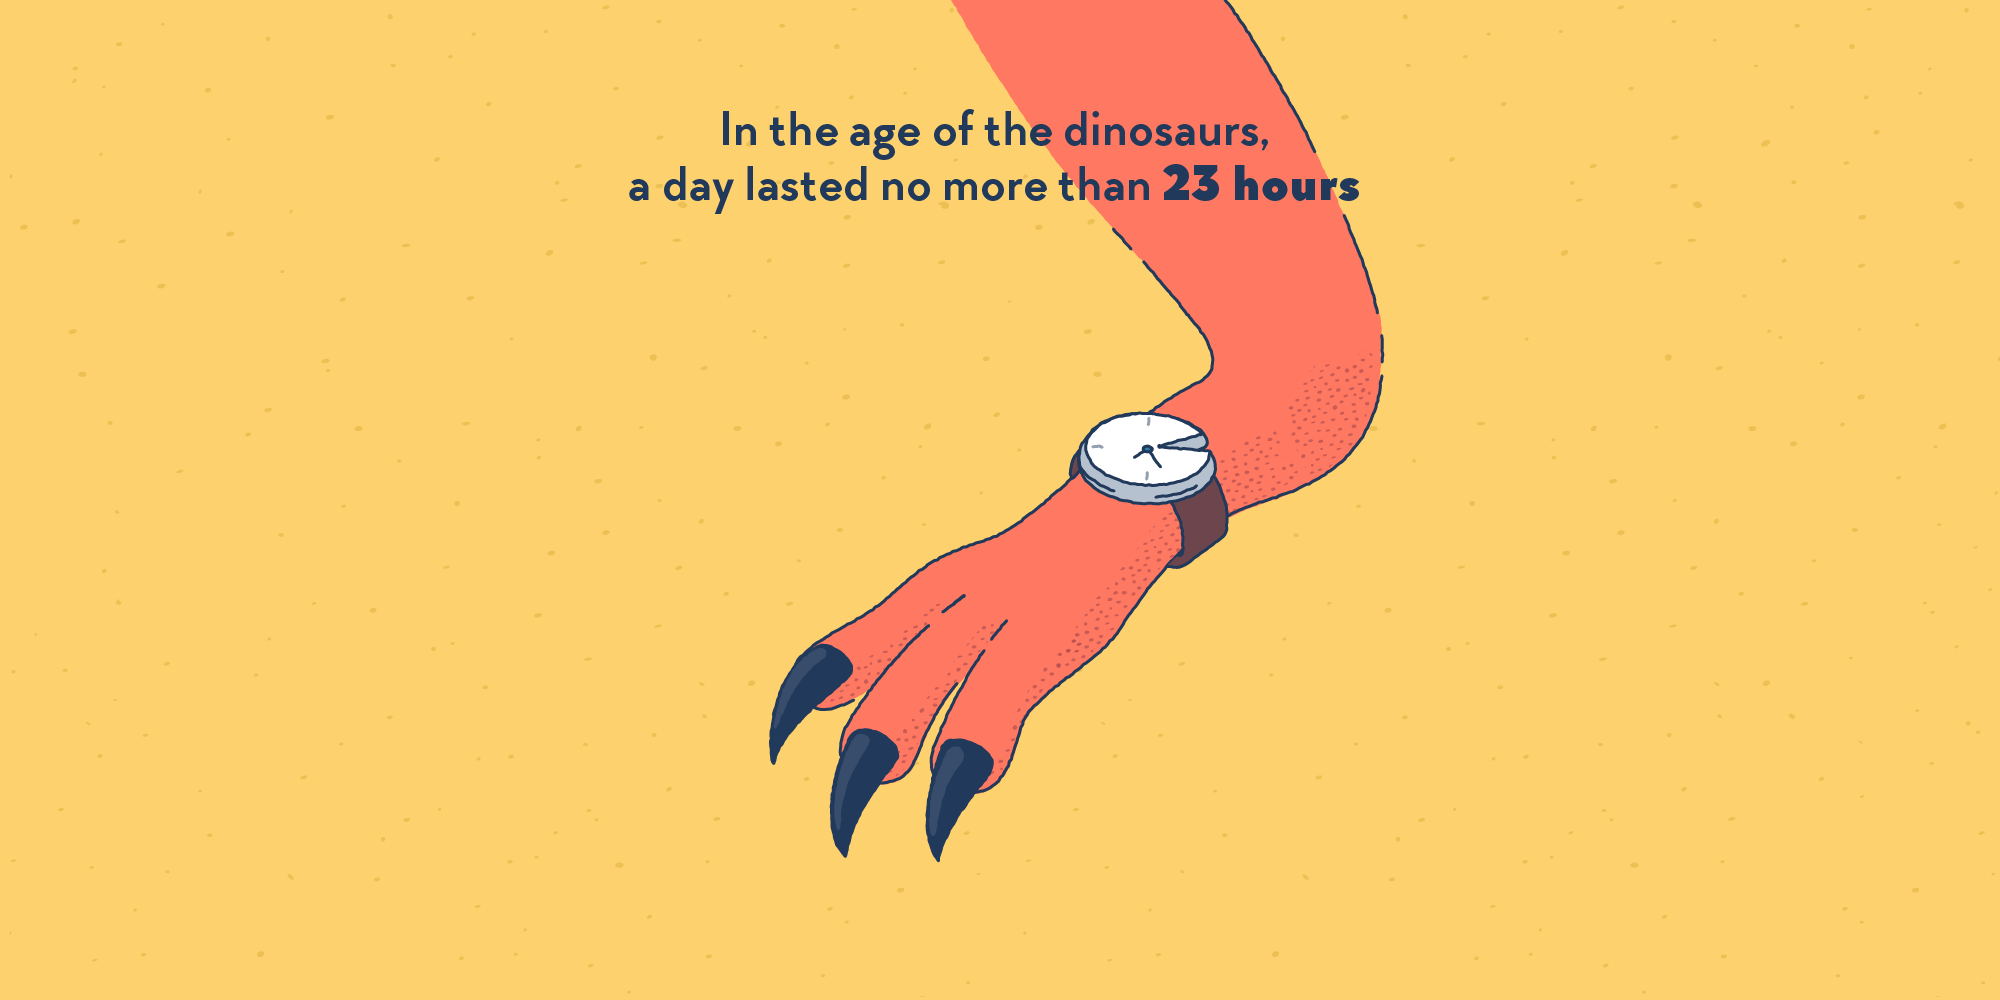 The arm of a dinosaur, wearing a wristwatch off which an hour-sized slice has been cut.